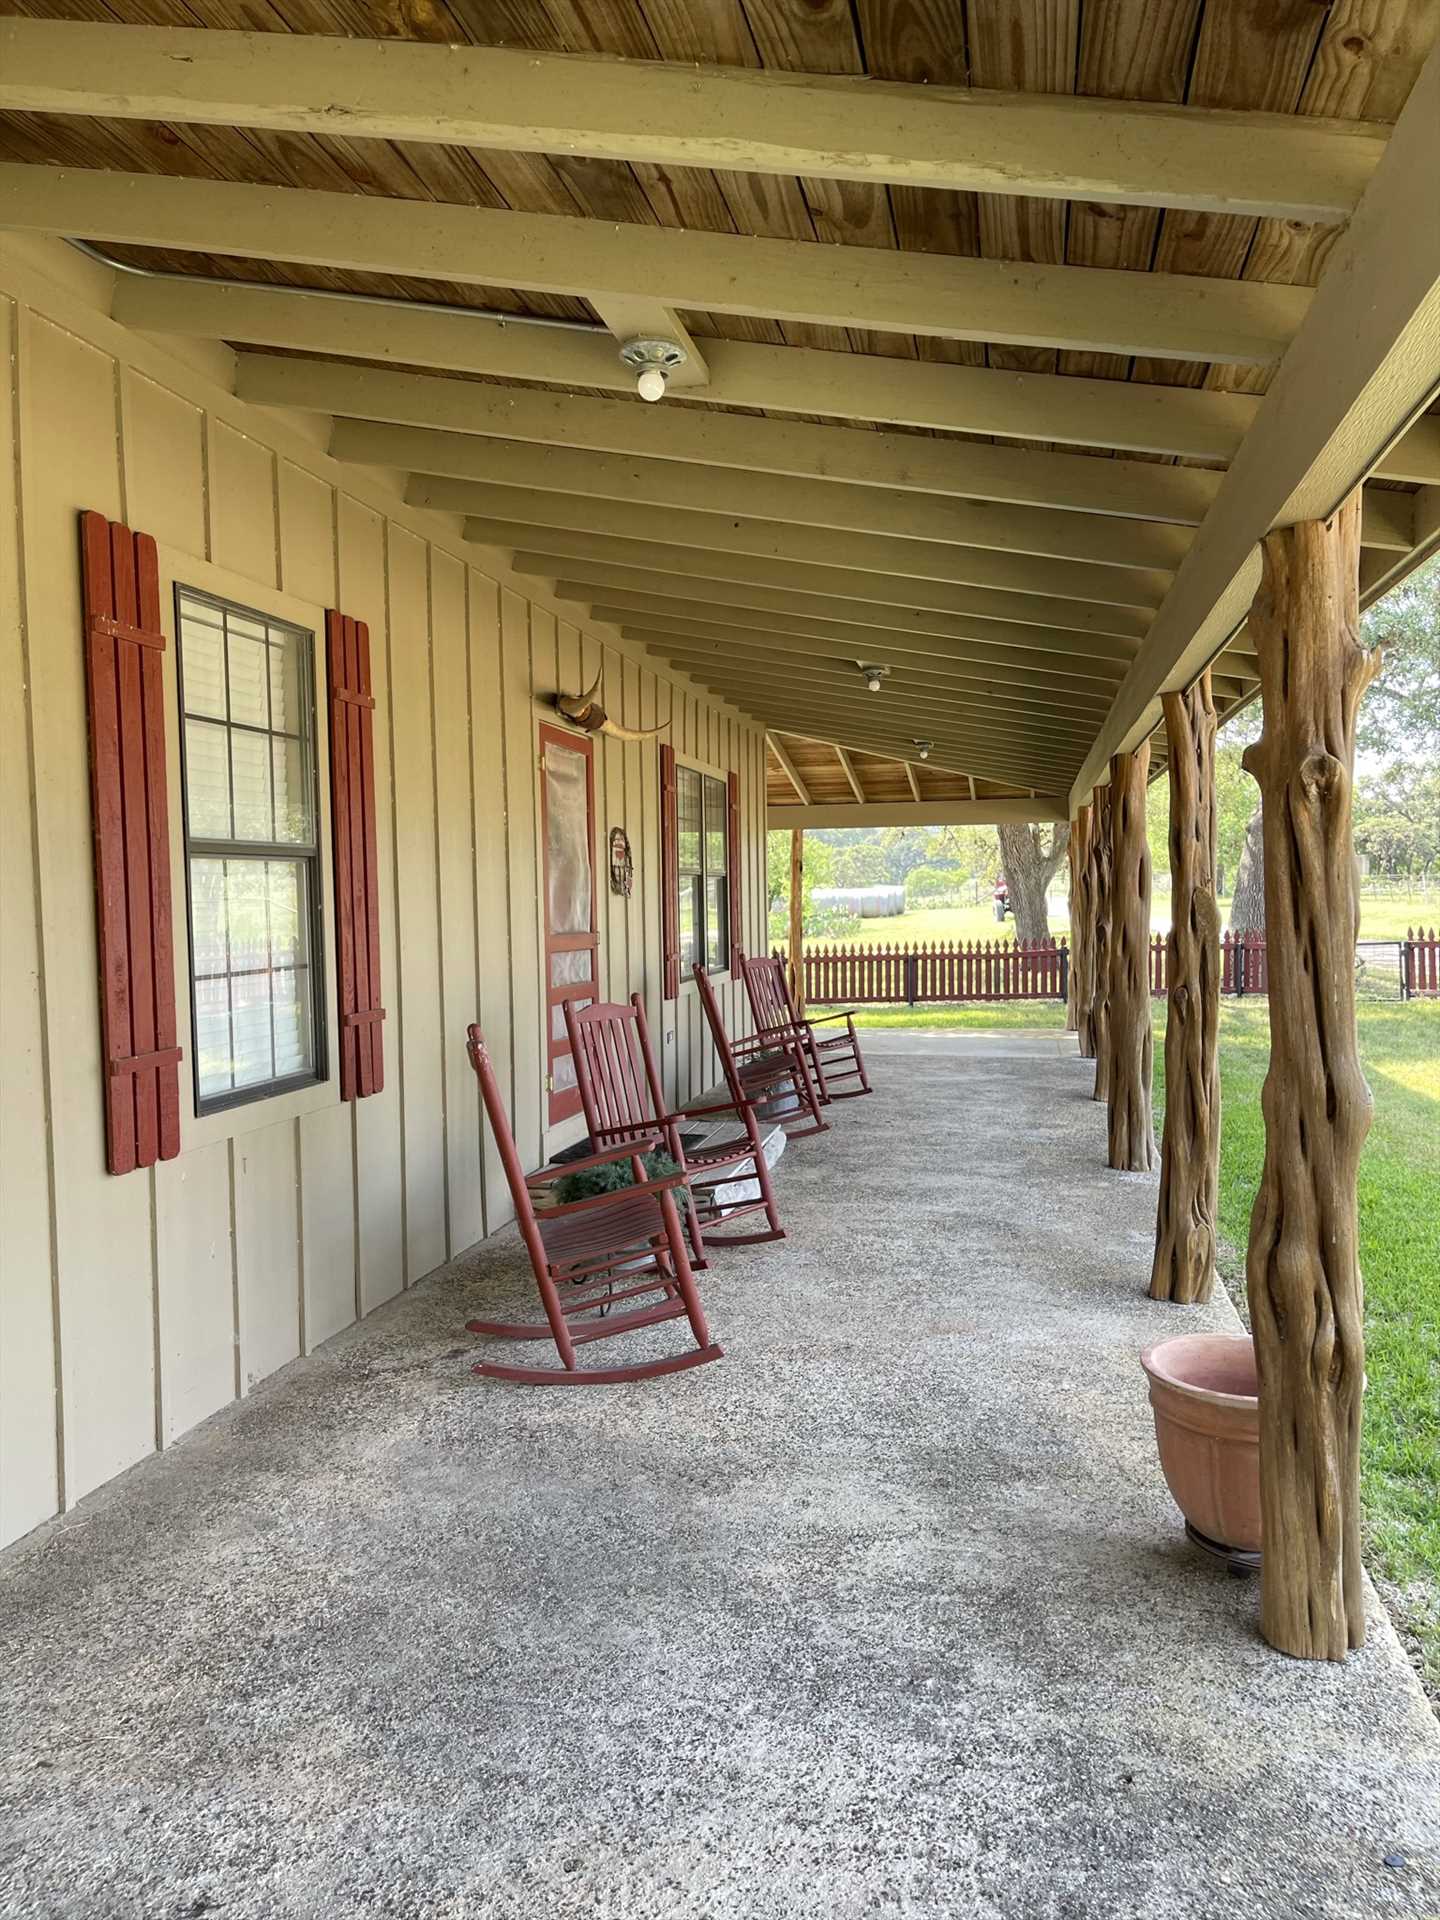                                                 Whether it's a sip of morning coffee or a glass of Texas wine, it all goes down better in the fresh country air!